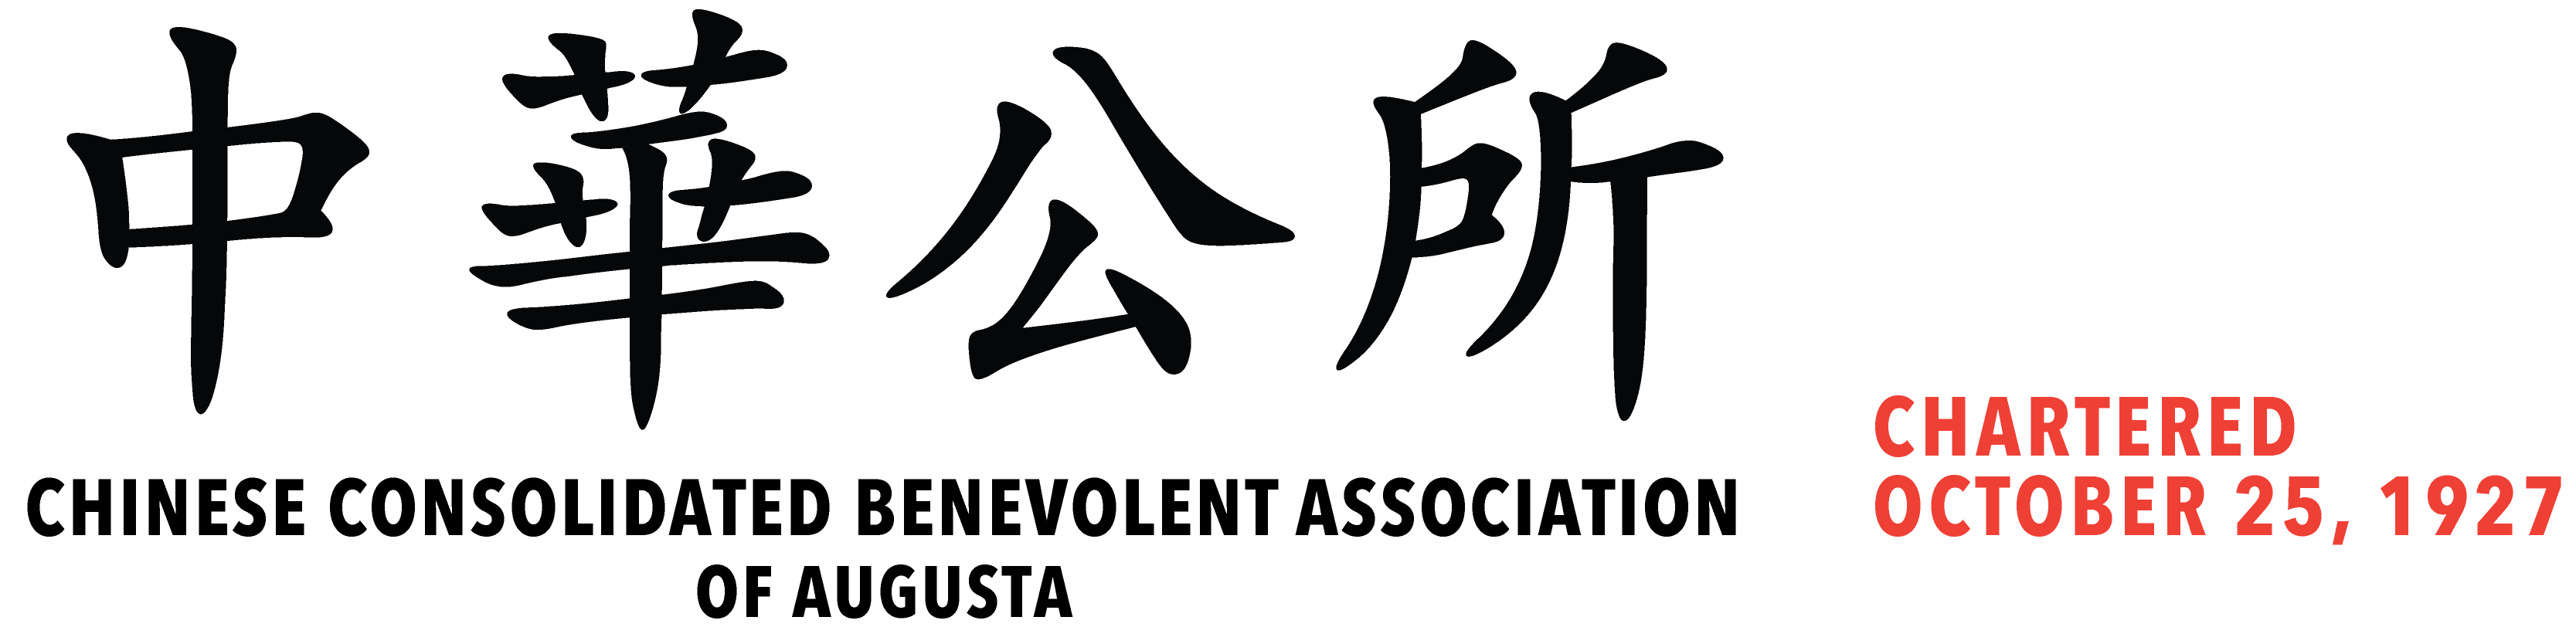 Chinese Consolidated Benevolent Association of Augusta, GA